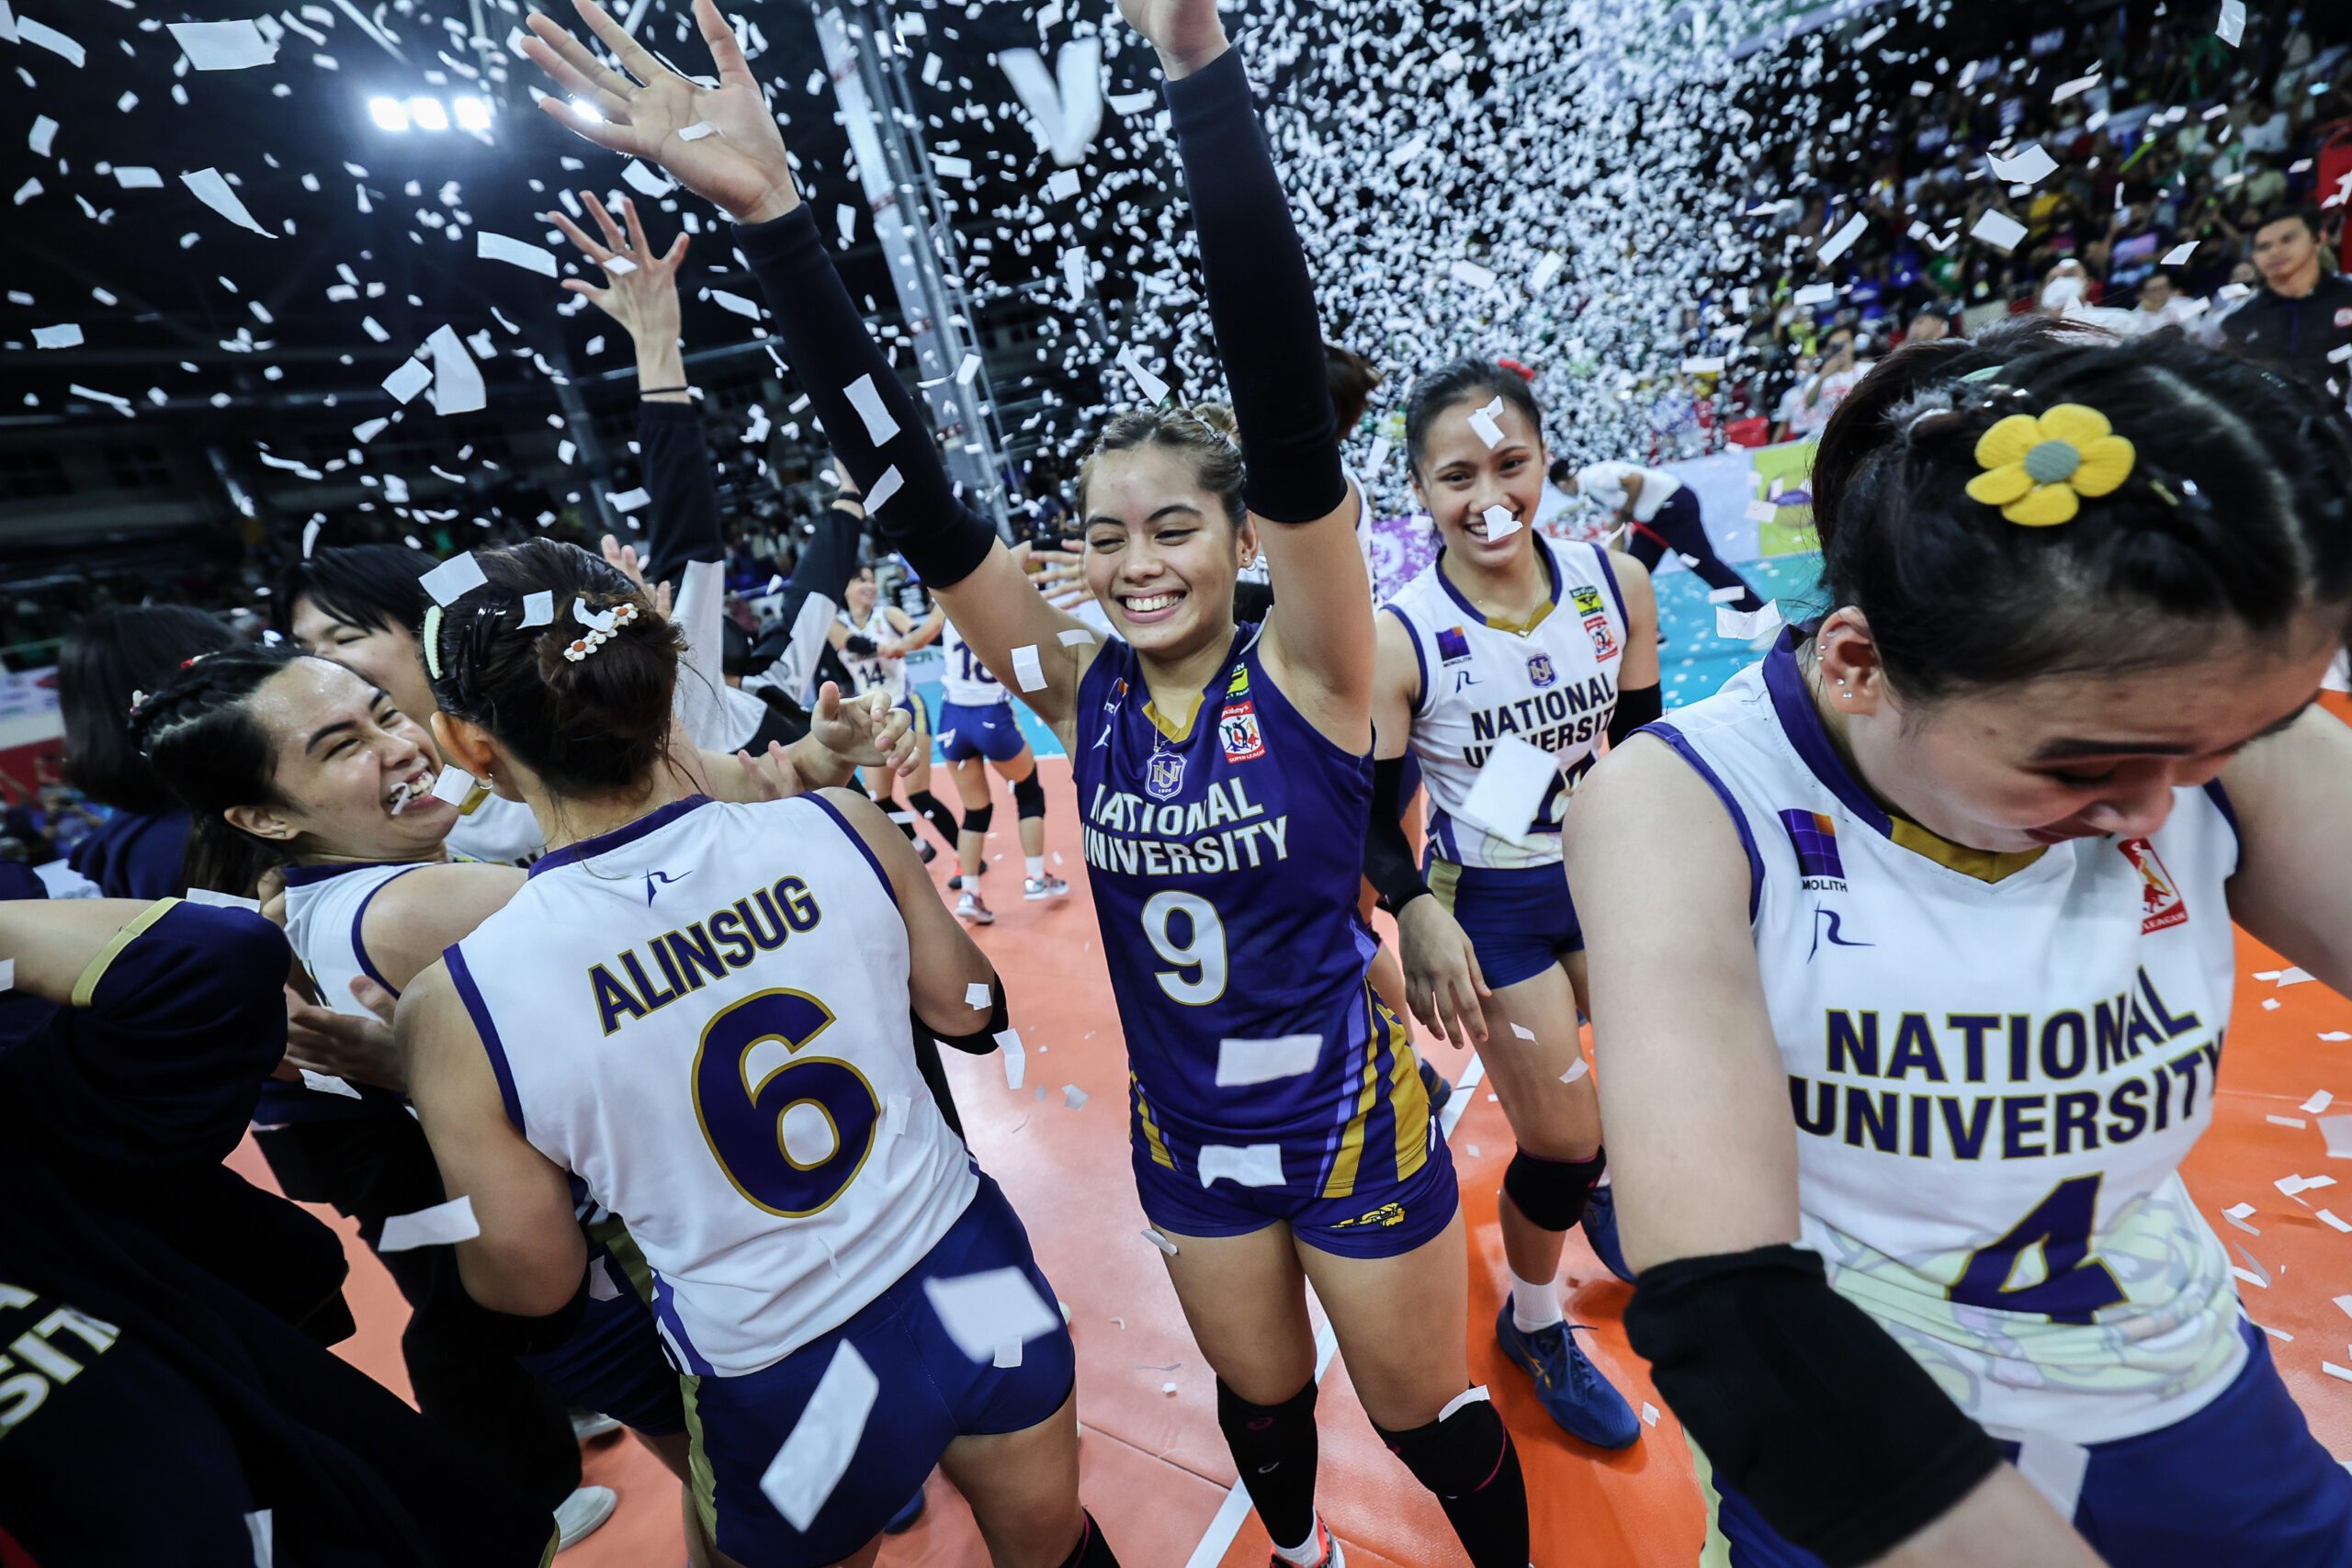 Dominant NU blanks La Salle to win 2022 Shakey’s Super League title